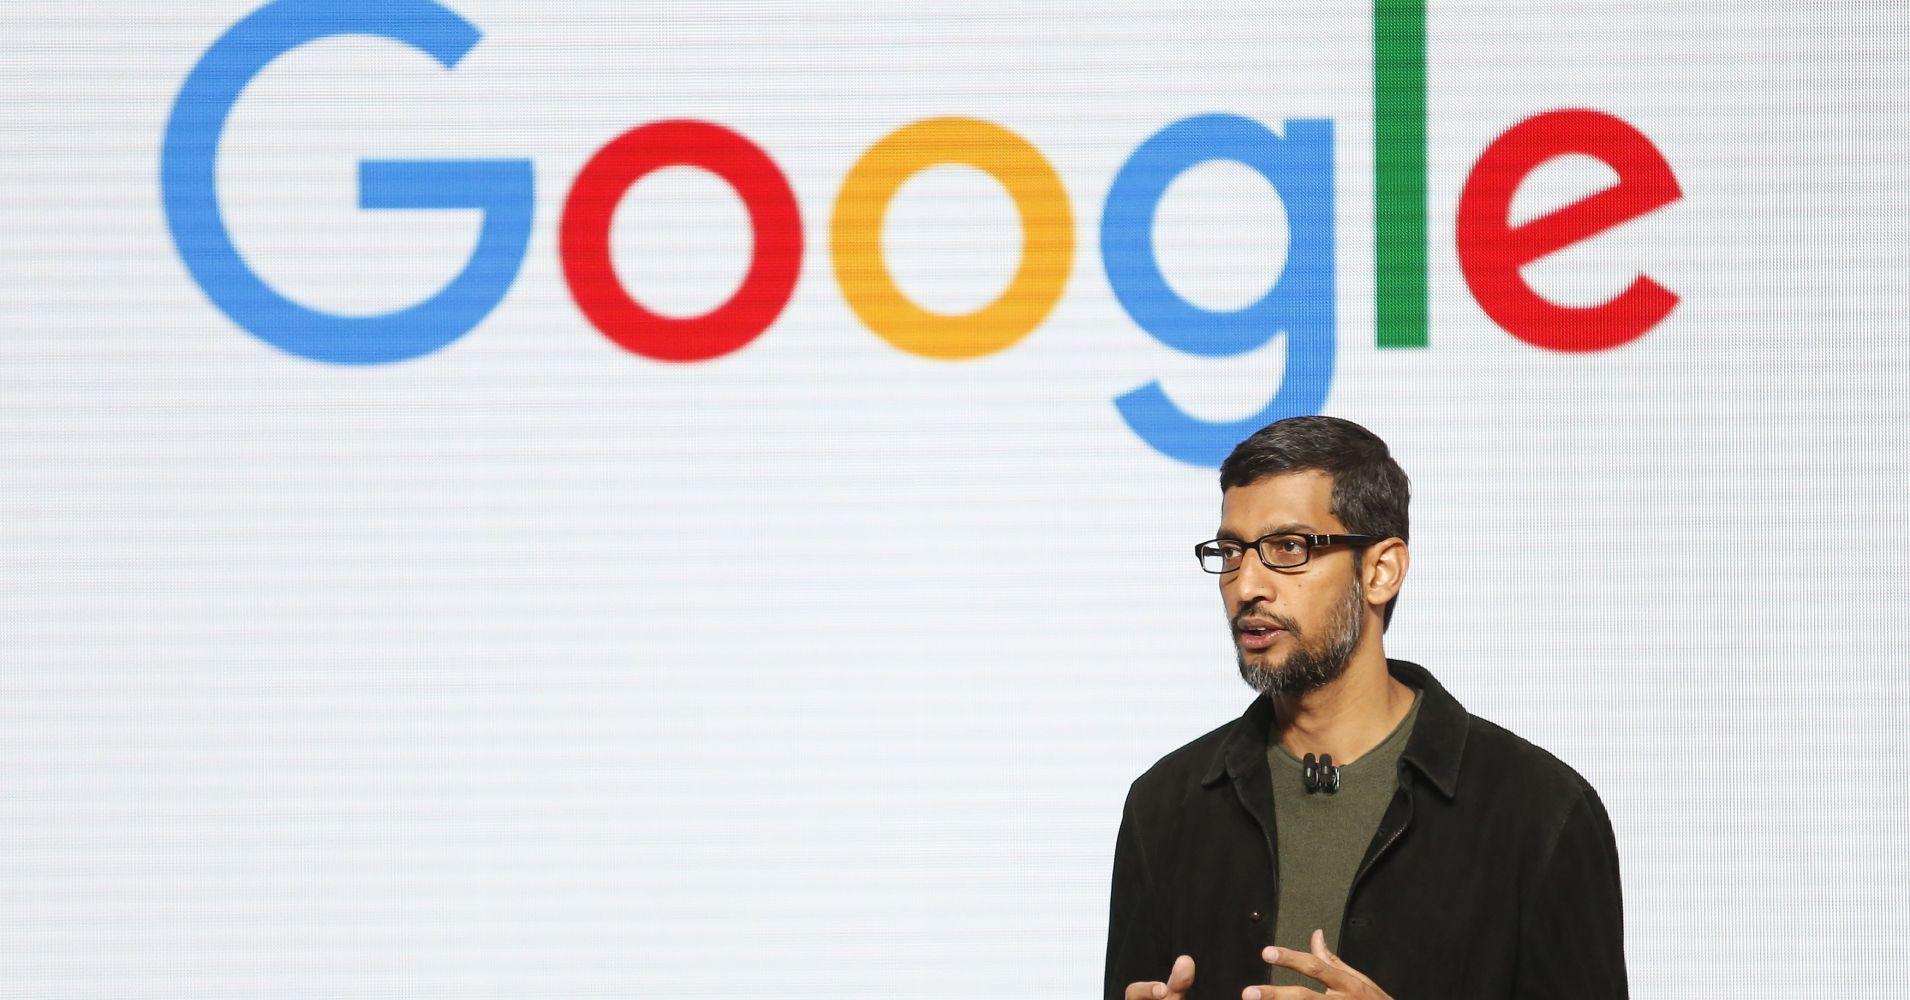 Pichai makes case for move into China, says Google censors elsewhere